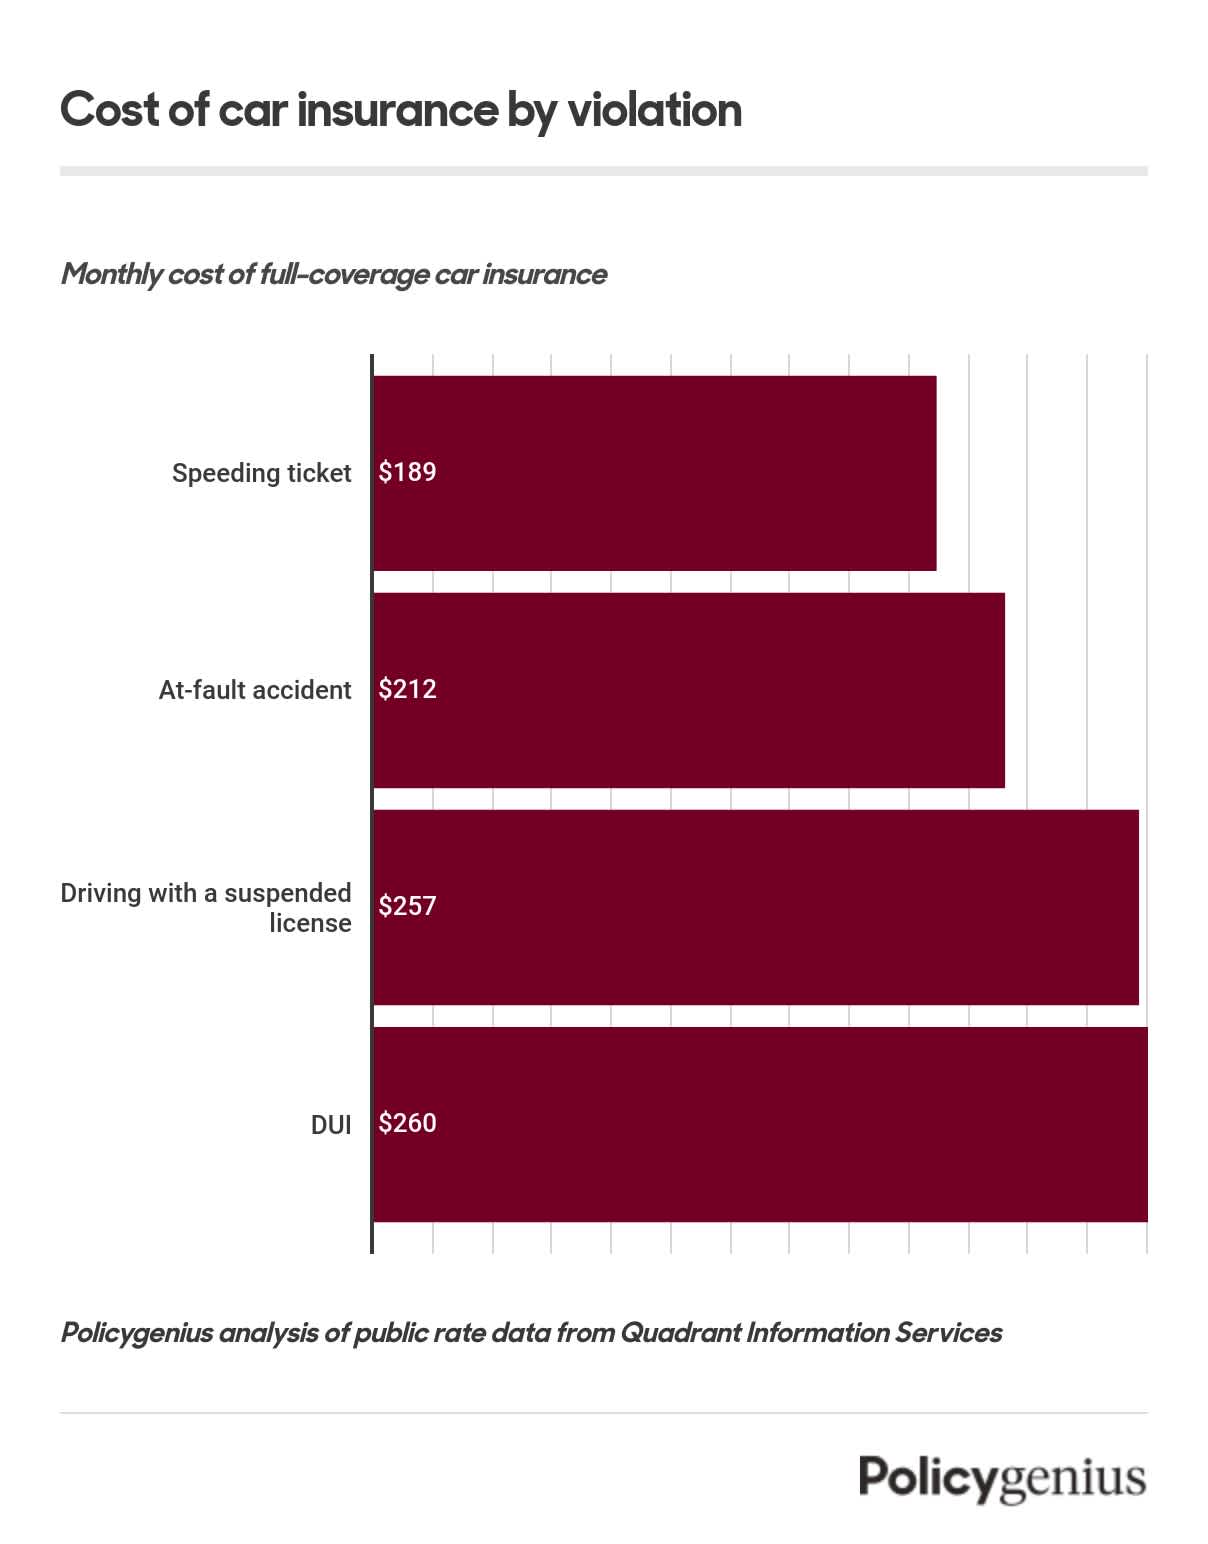 A bar graph showing the cost of car insurance after a speeding ticket, at-fault accident, driving with a suspended license, and a DUI.